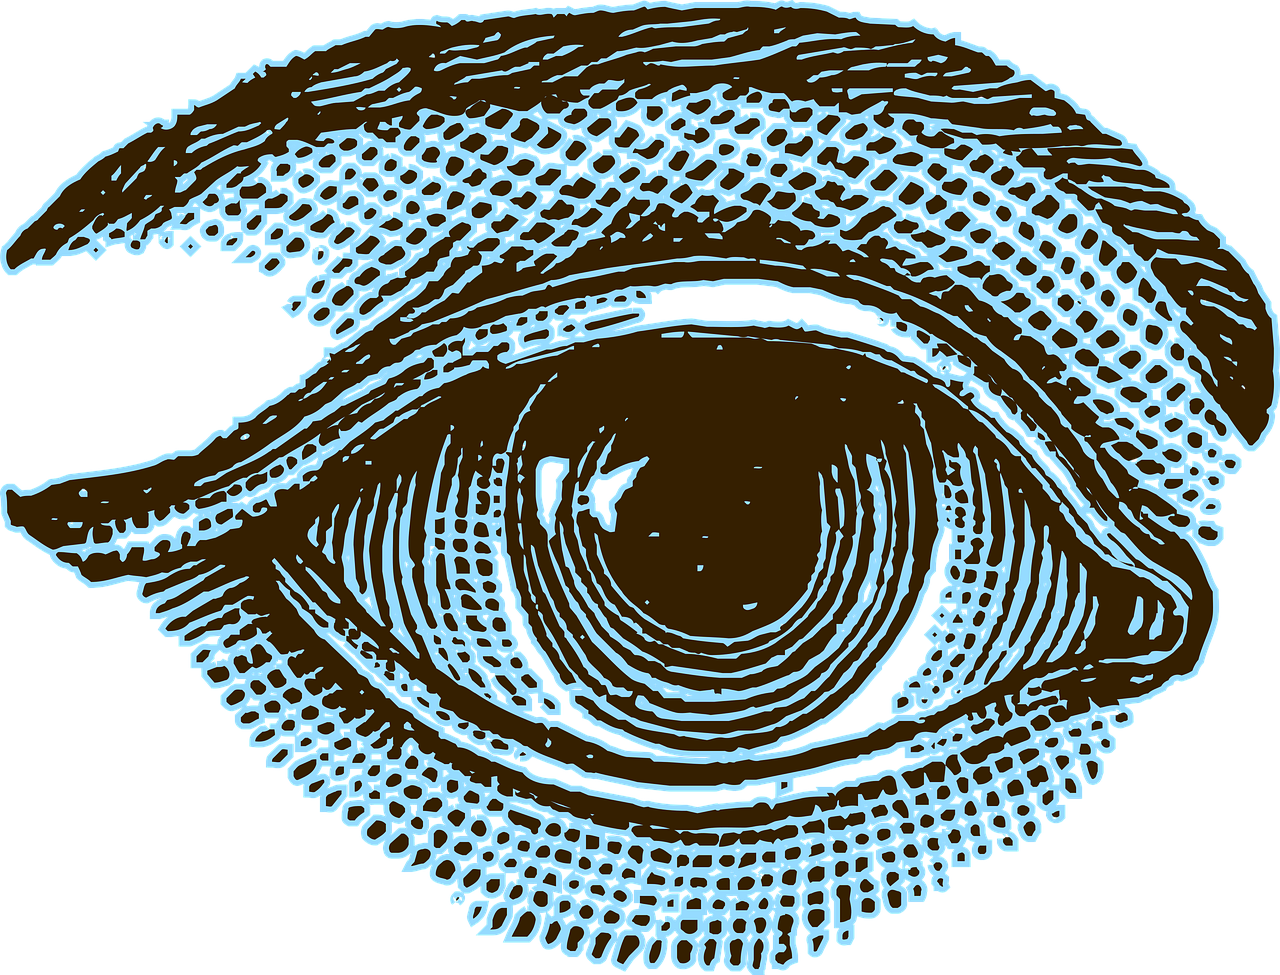 all-seeing-eye-4495361_1280.png